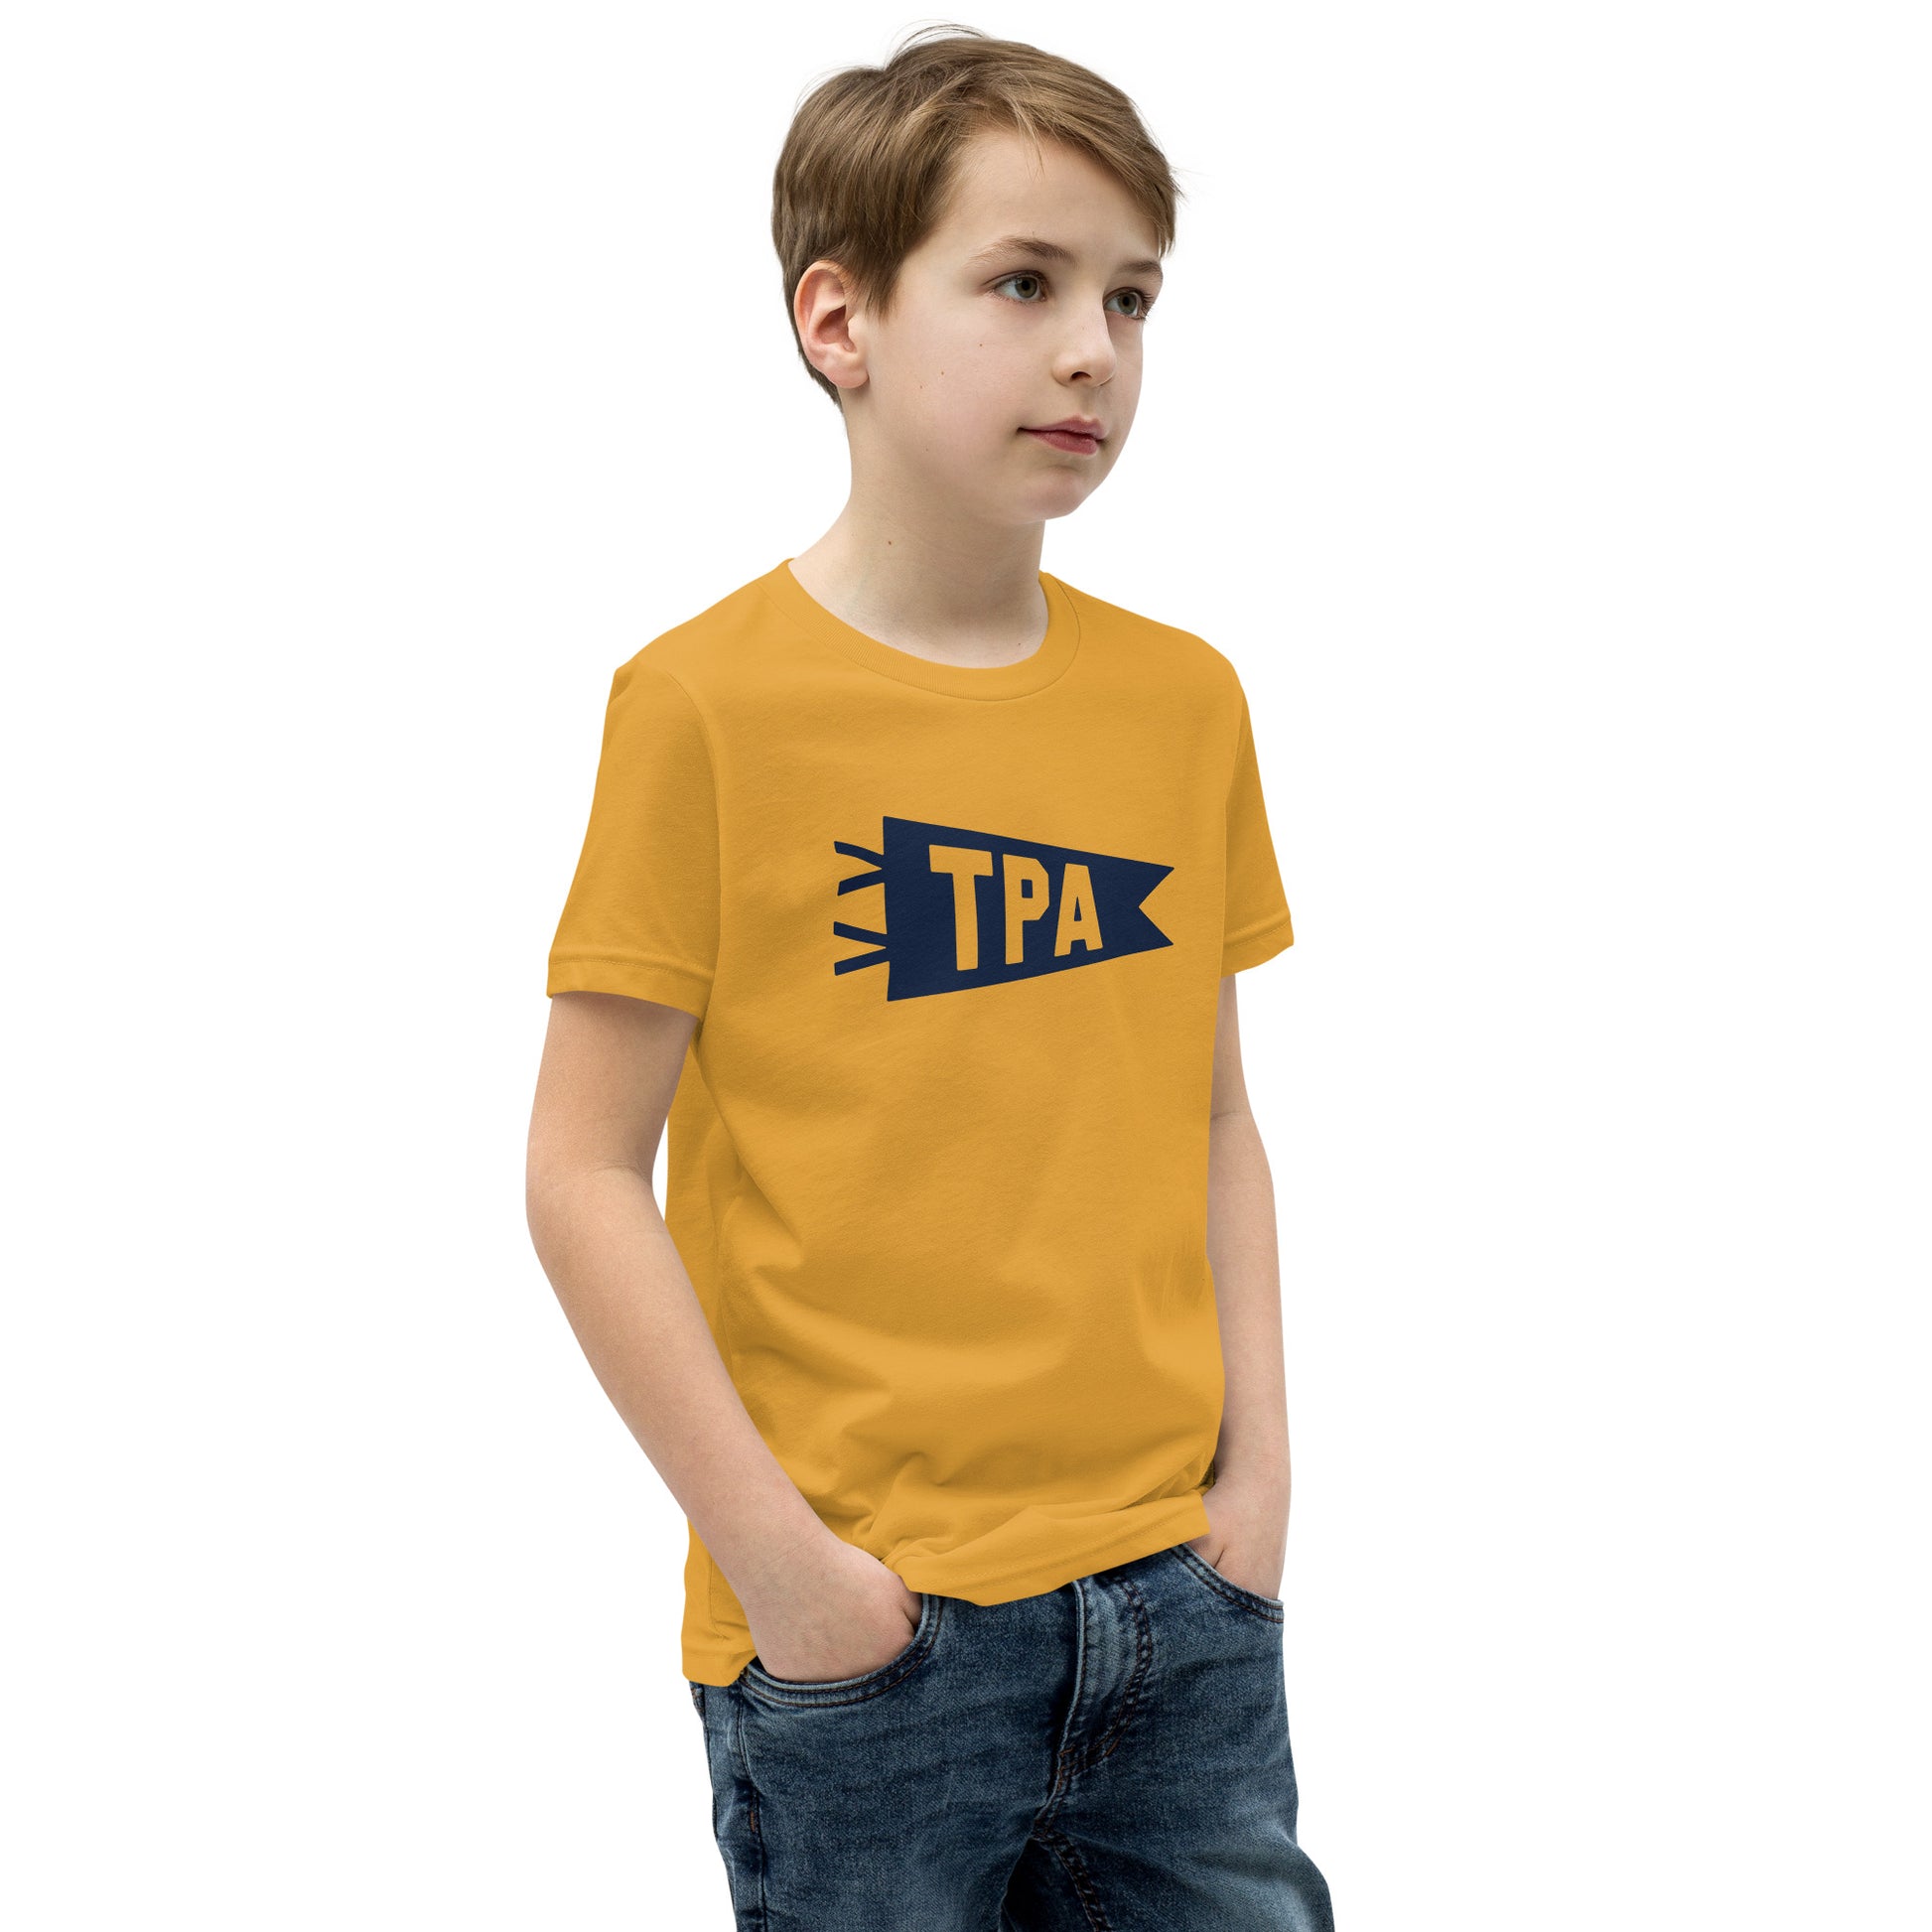 Kid's Airport Code Tee - Navy Blue Graphic • TPA Tampa • YHM Designs - Image 07